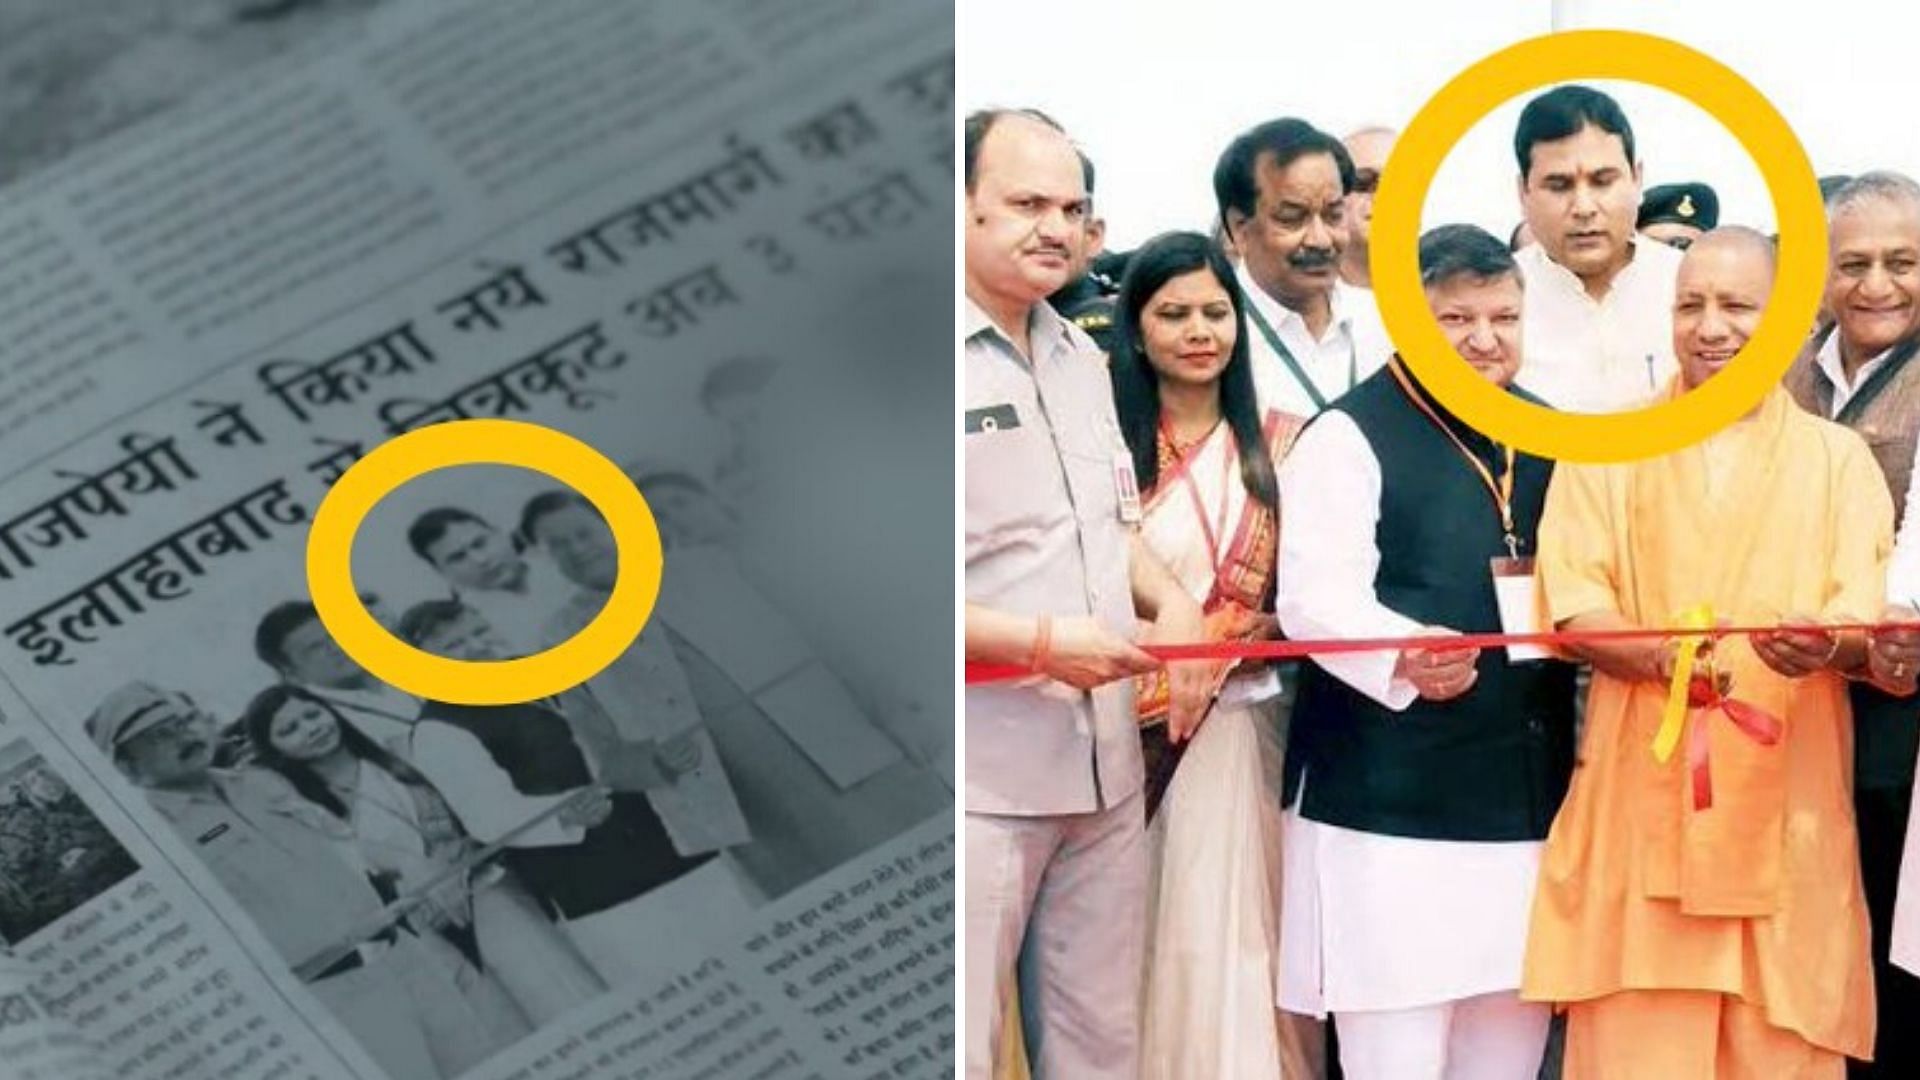 A BJP MLA has alleged <i>Paatal Lok</i> used his photo without permission.